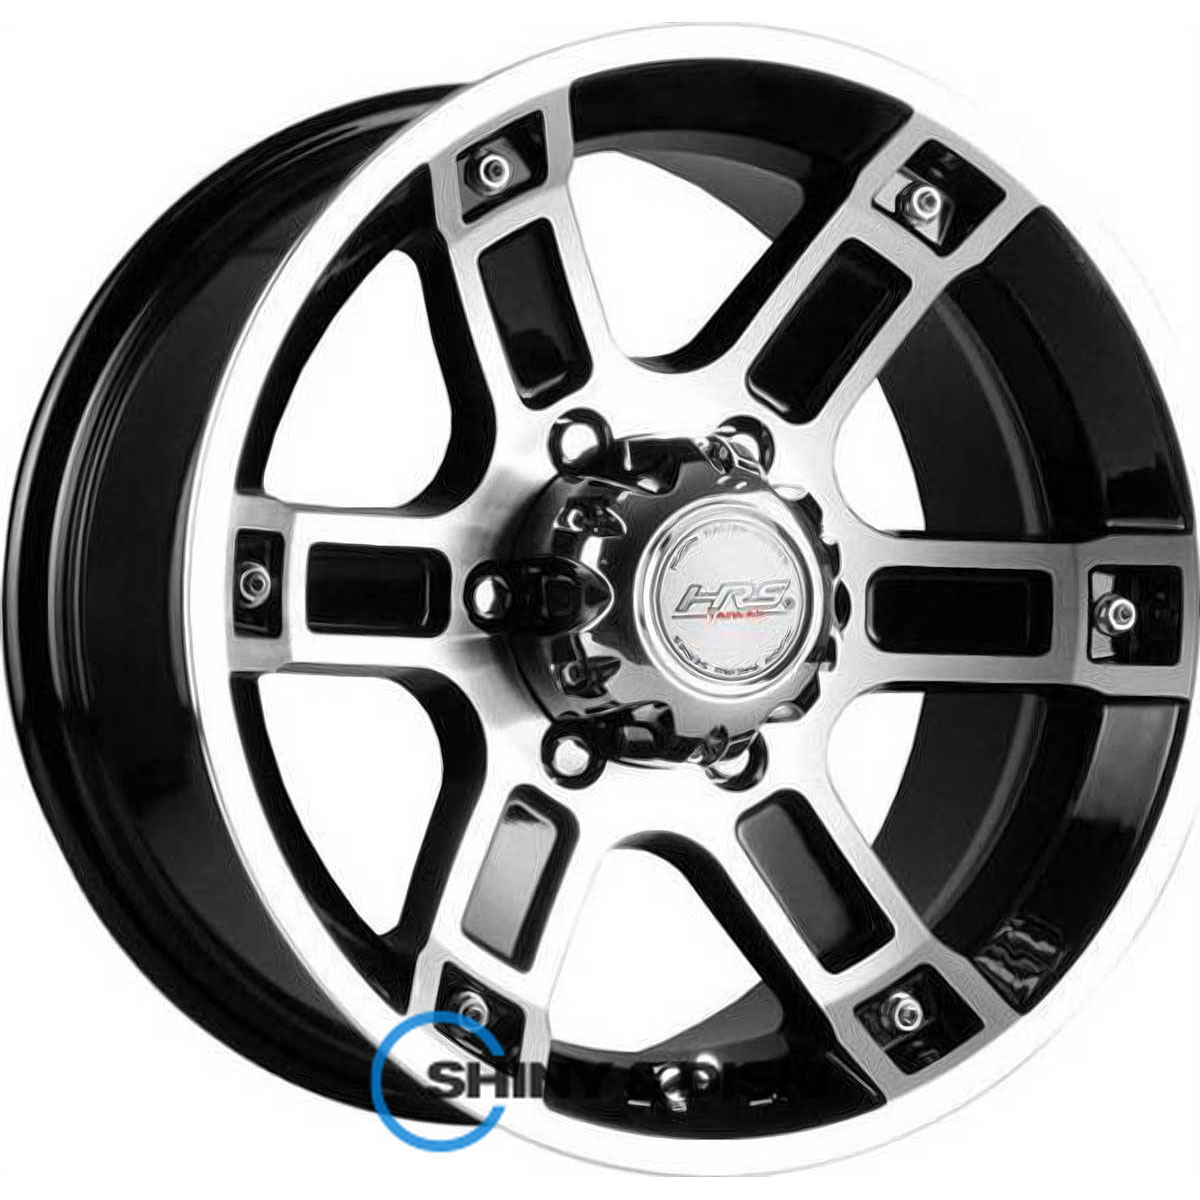 rs tuning h-468 bkfp r15 w7 pcd5x139.7 et0 dia108.2